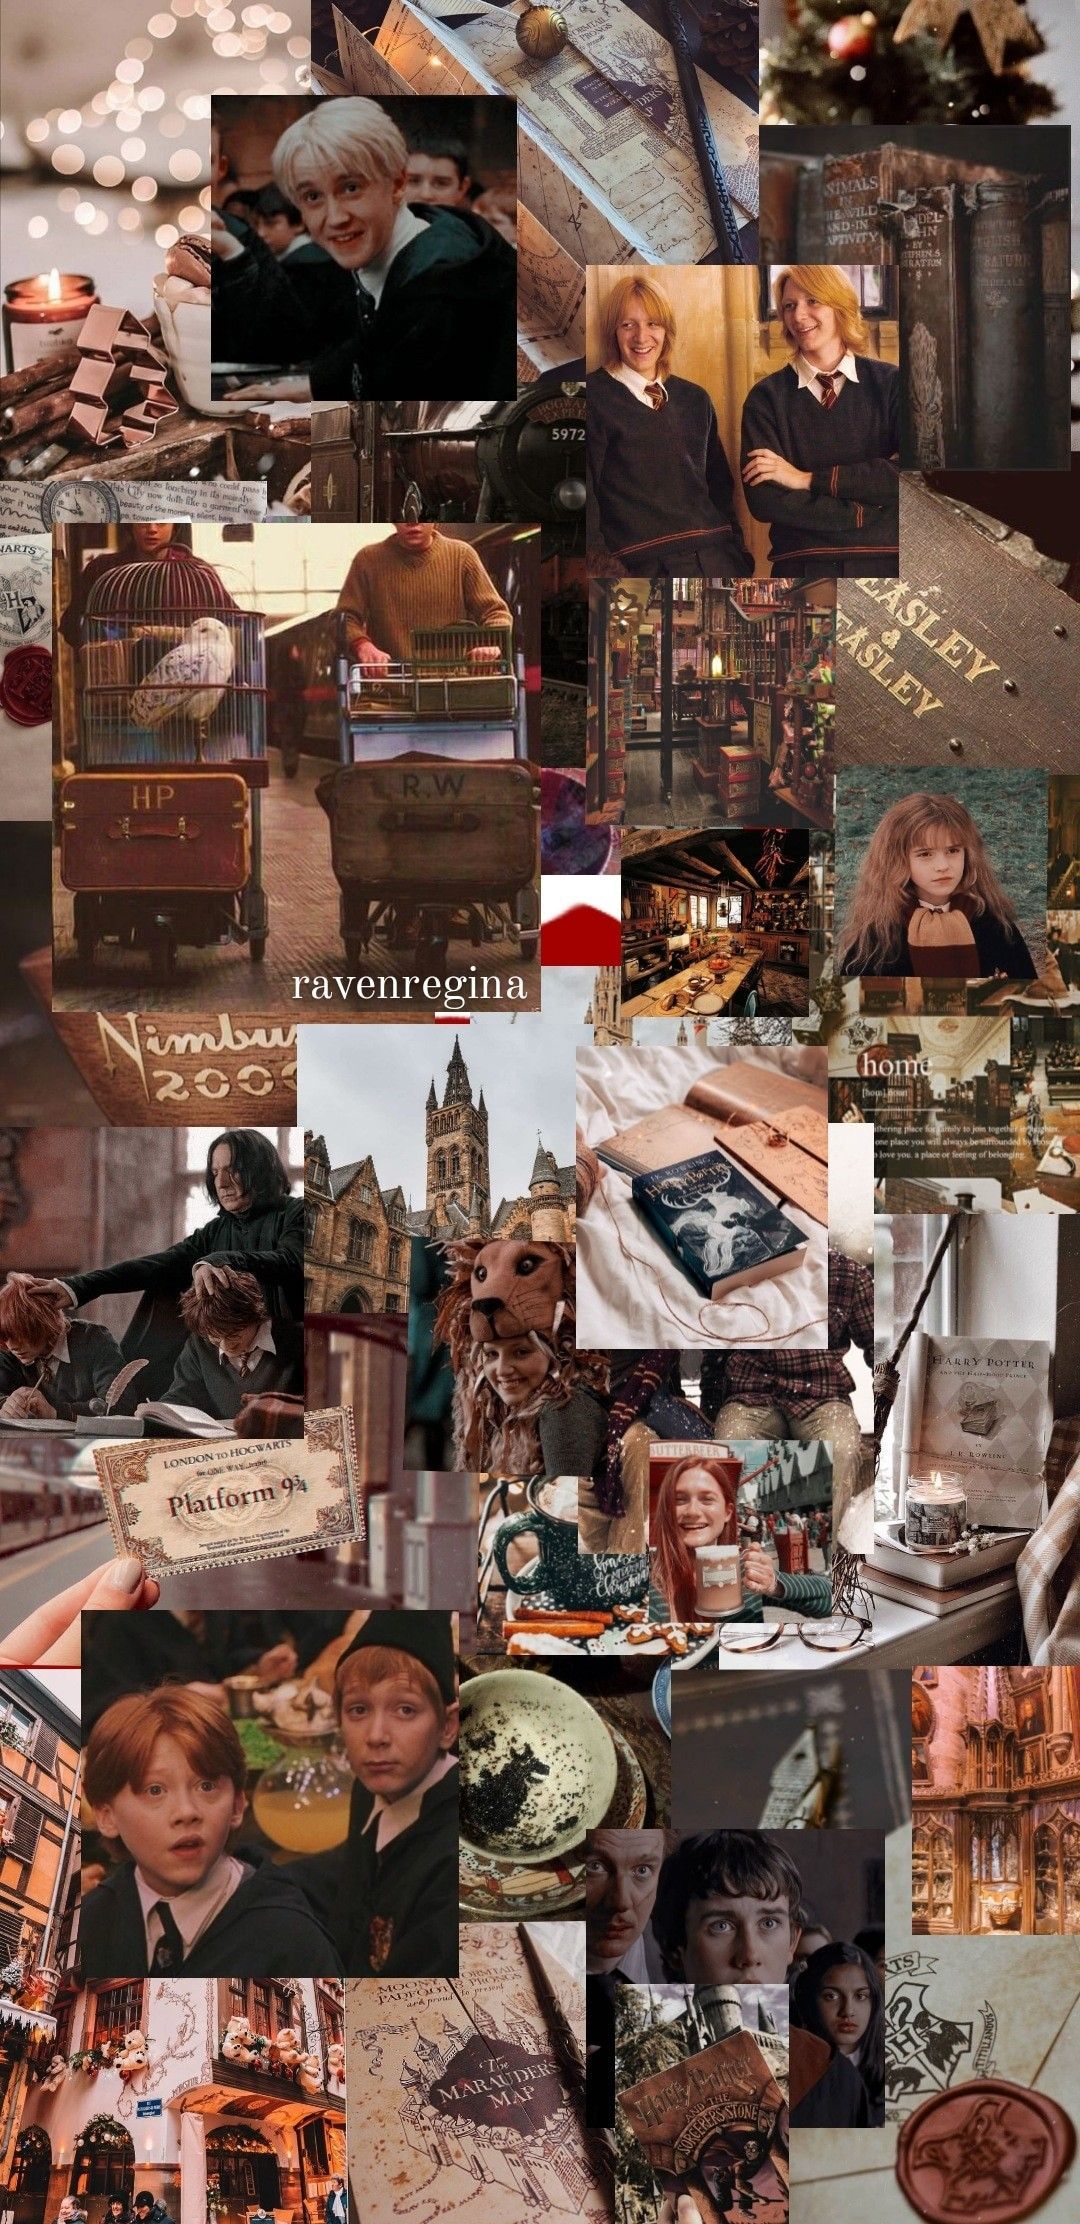 Harry potter wallpaper collage aesthetic. Harry potter wallpaper, Harry potter illustrations, Harry potter